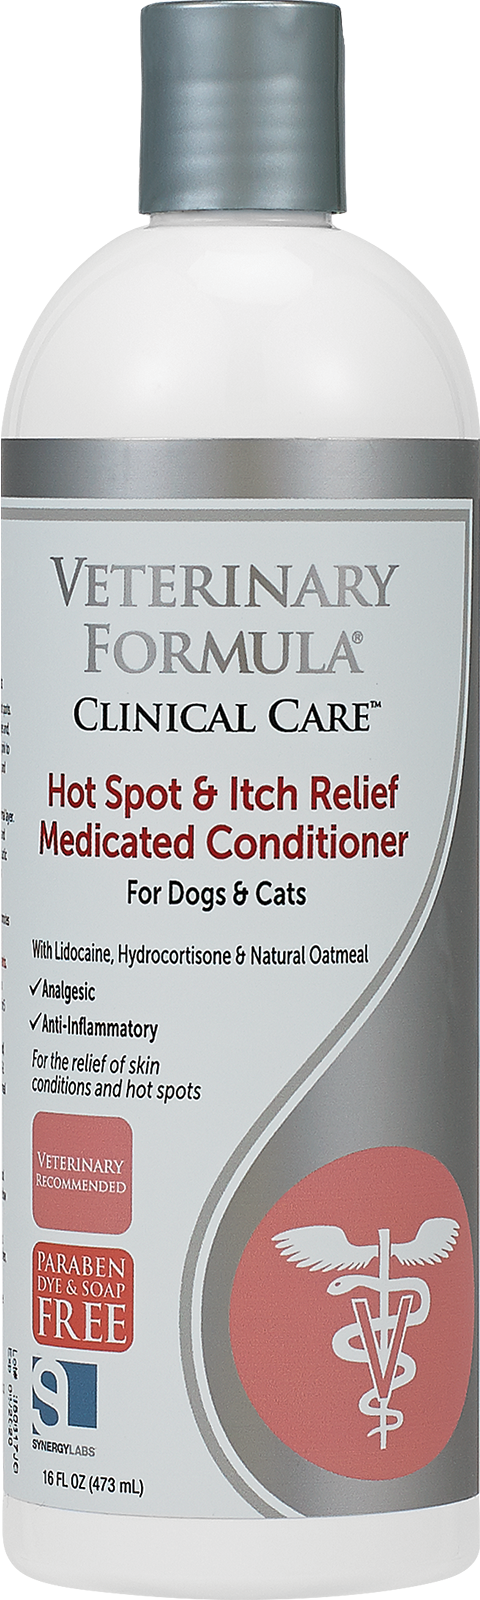 Synergy Labs Hot Spot & Itch Relief Medicated Conditioner for Dogs and Cats (16 fl oz)